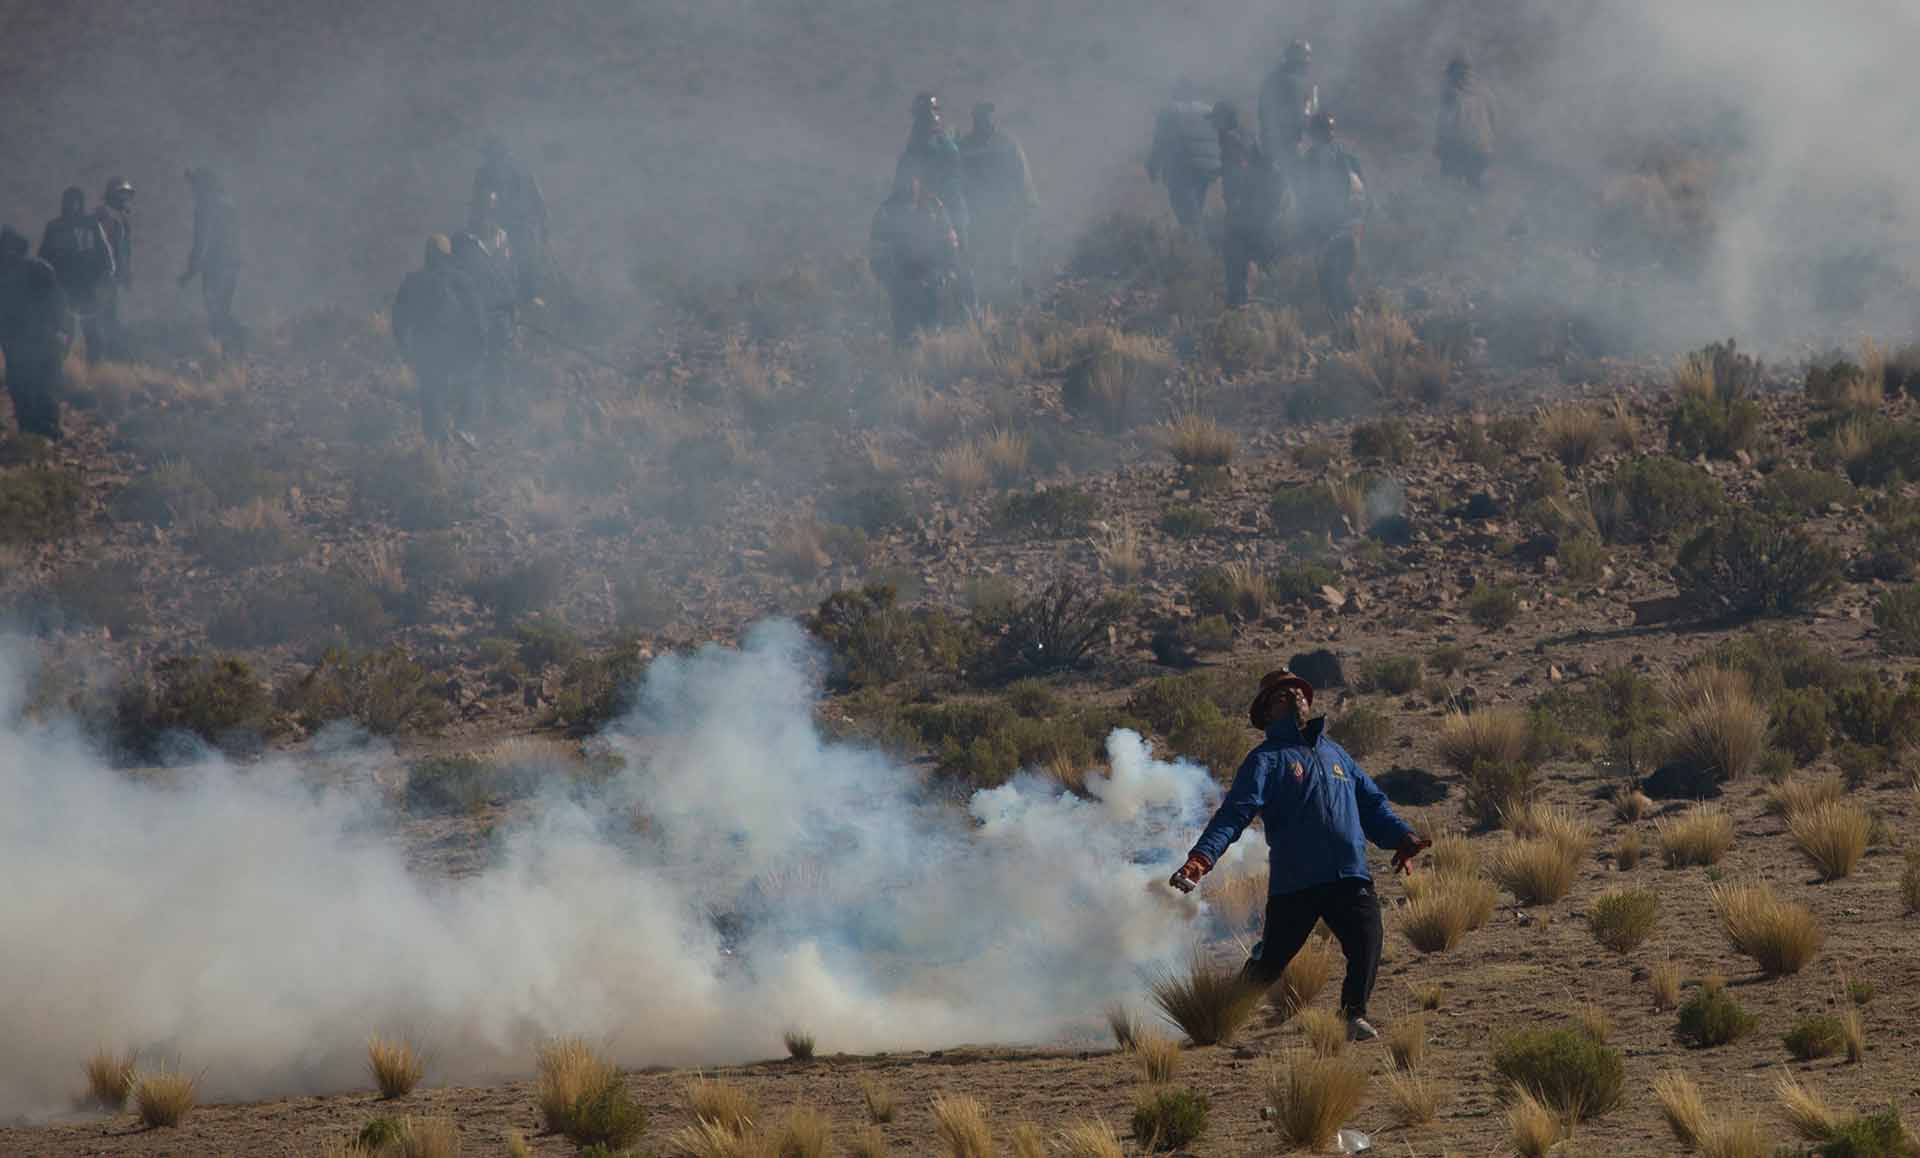 Independent miners clash with the police as they run from clouds of tear gas during protests in Panduro, Bolivia, Thursday, Aug. 25, 2016. Thousands of Independent miners continued their protests with roadblocks which precipitated the clashes as the police attempted to dislodge them. (AP Photo/Juan Karita)